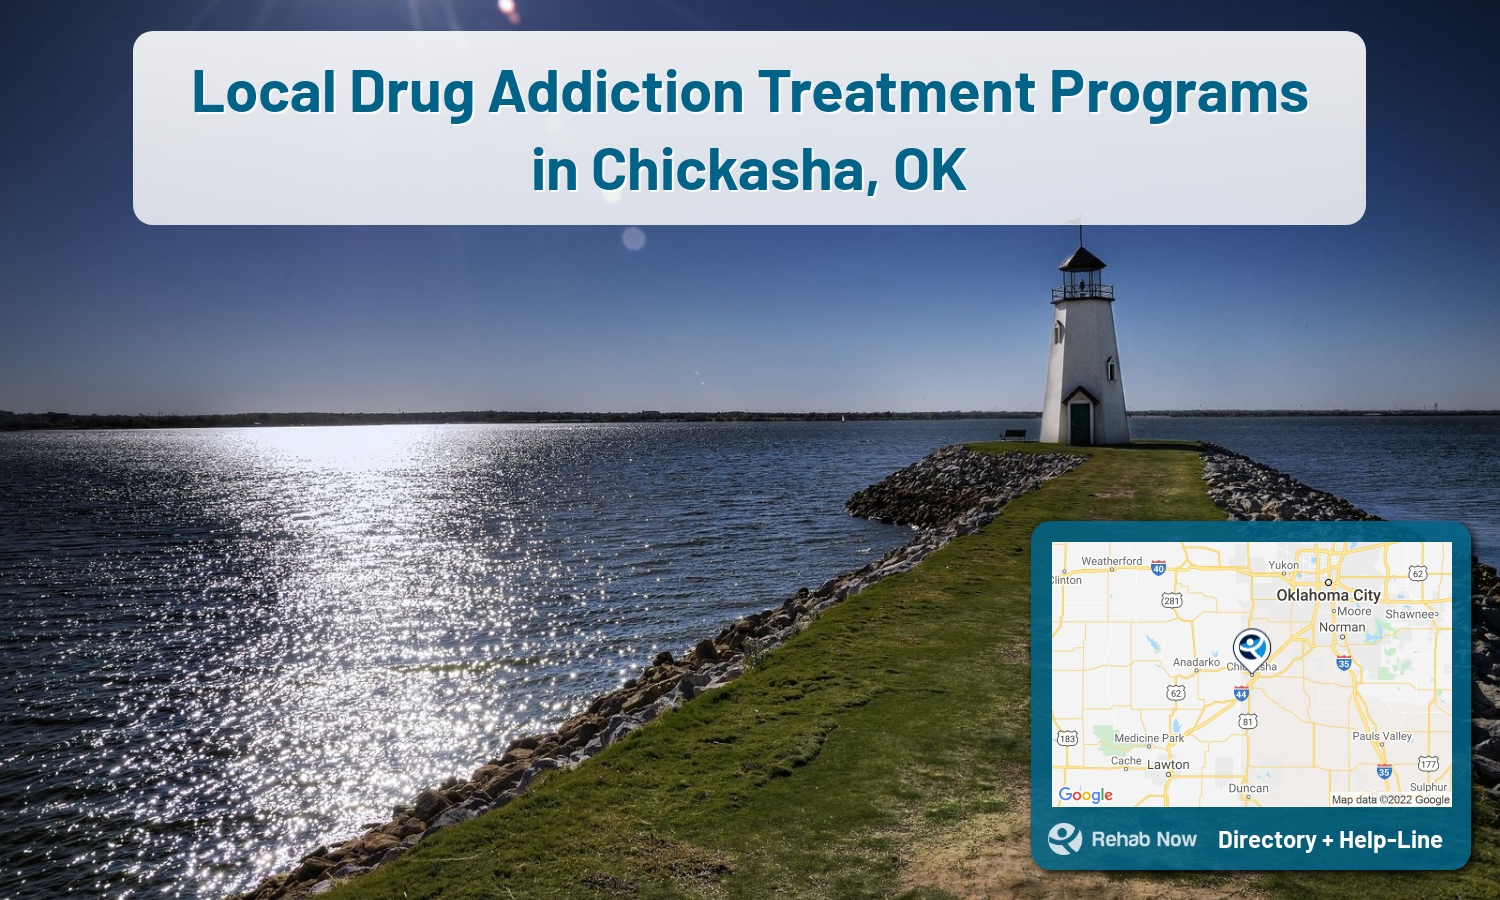 View options, availability, treatment methods, and more, for drug rehab and alcohol treatment in Chickasha, Oklahoma